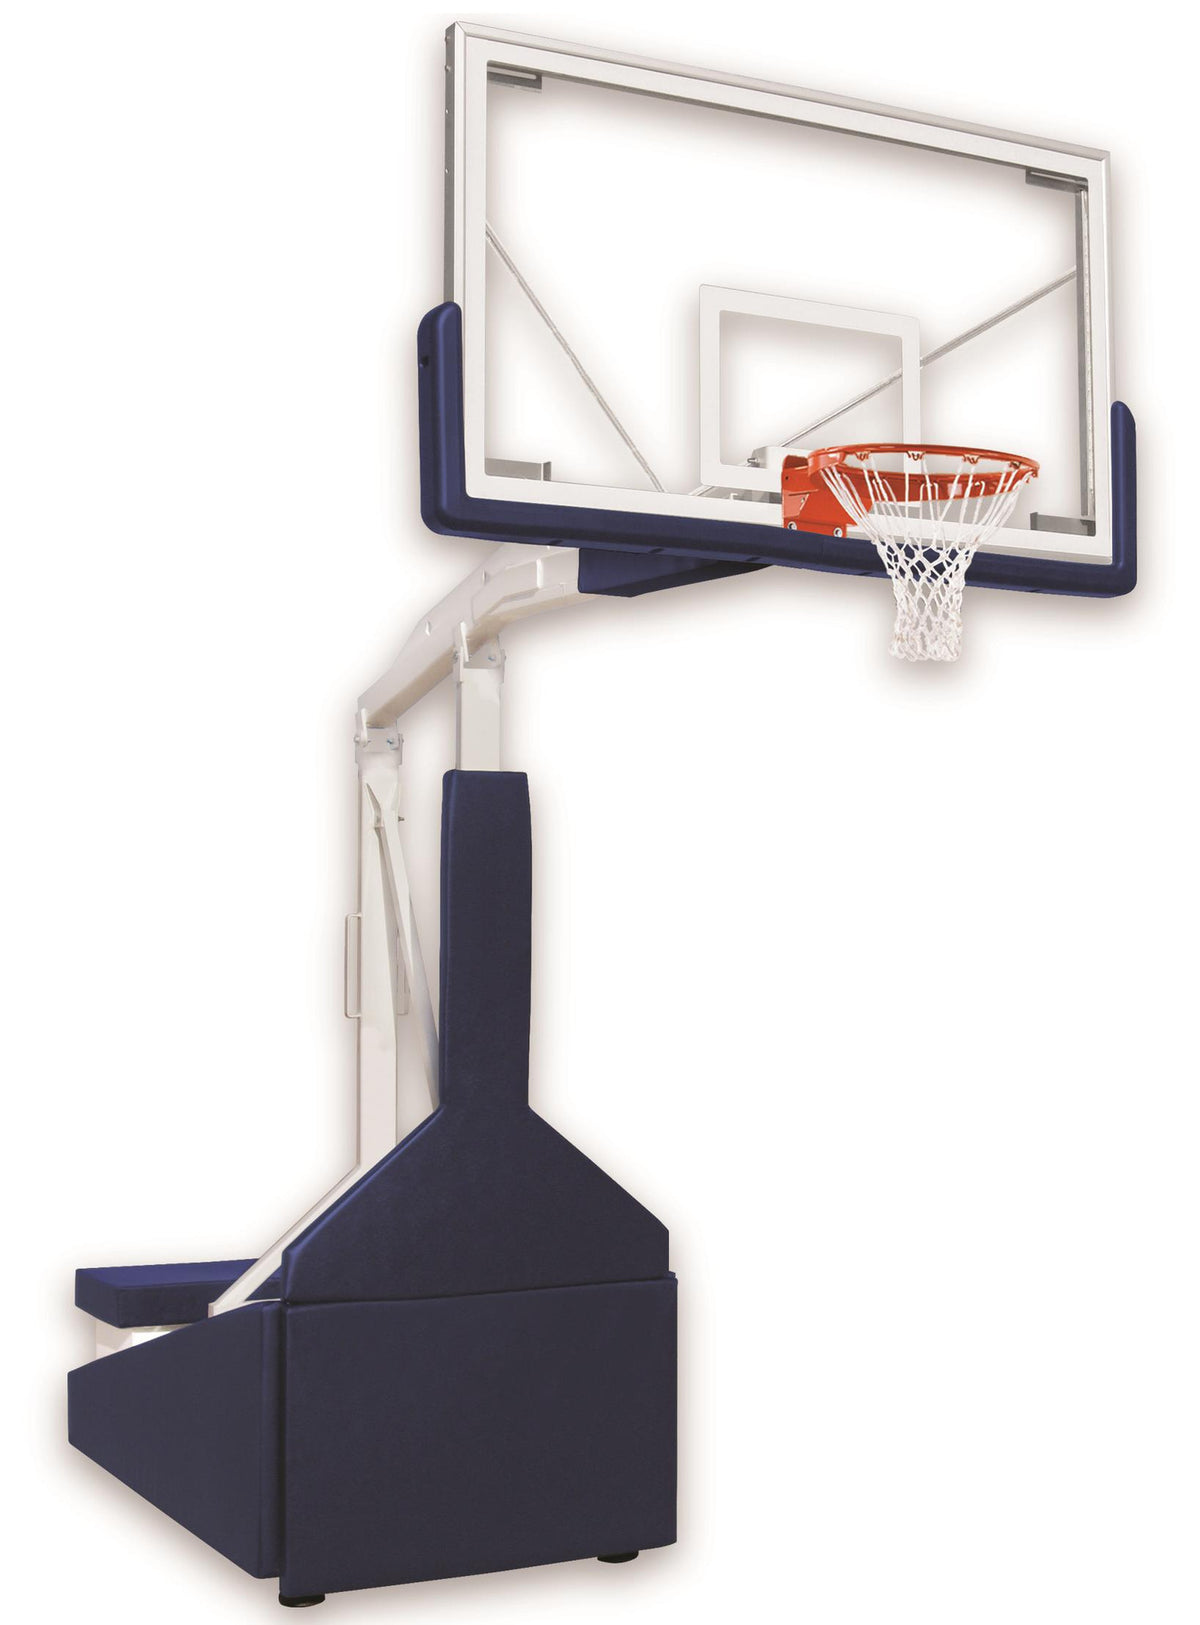 First Team Tempest Triumph ST Portable Adjustable Basketball Hoop 72 inch Tempered Glass for Standard Floors